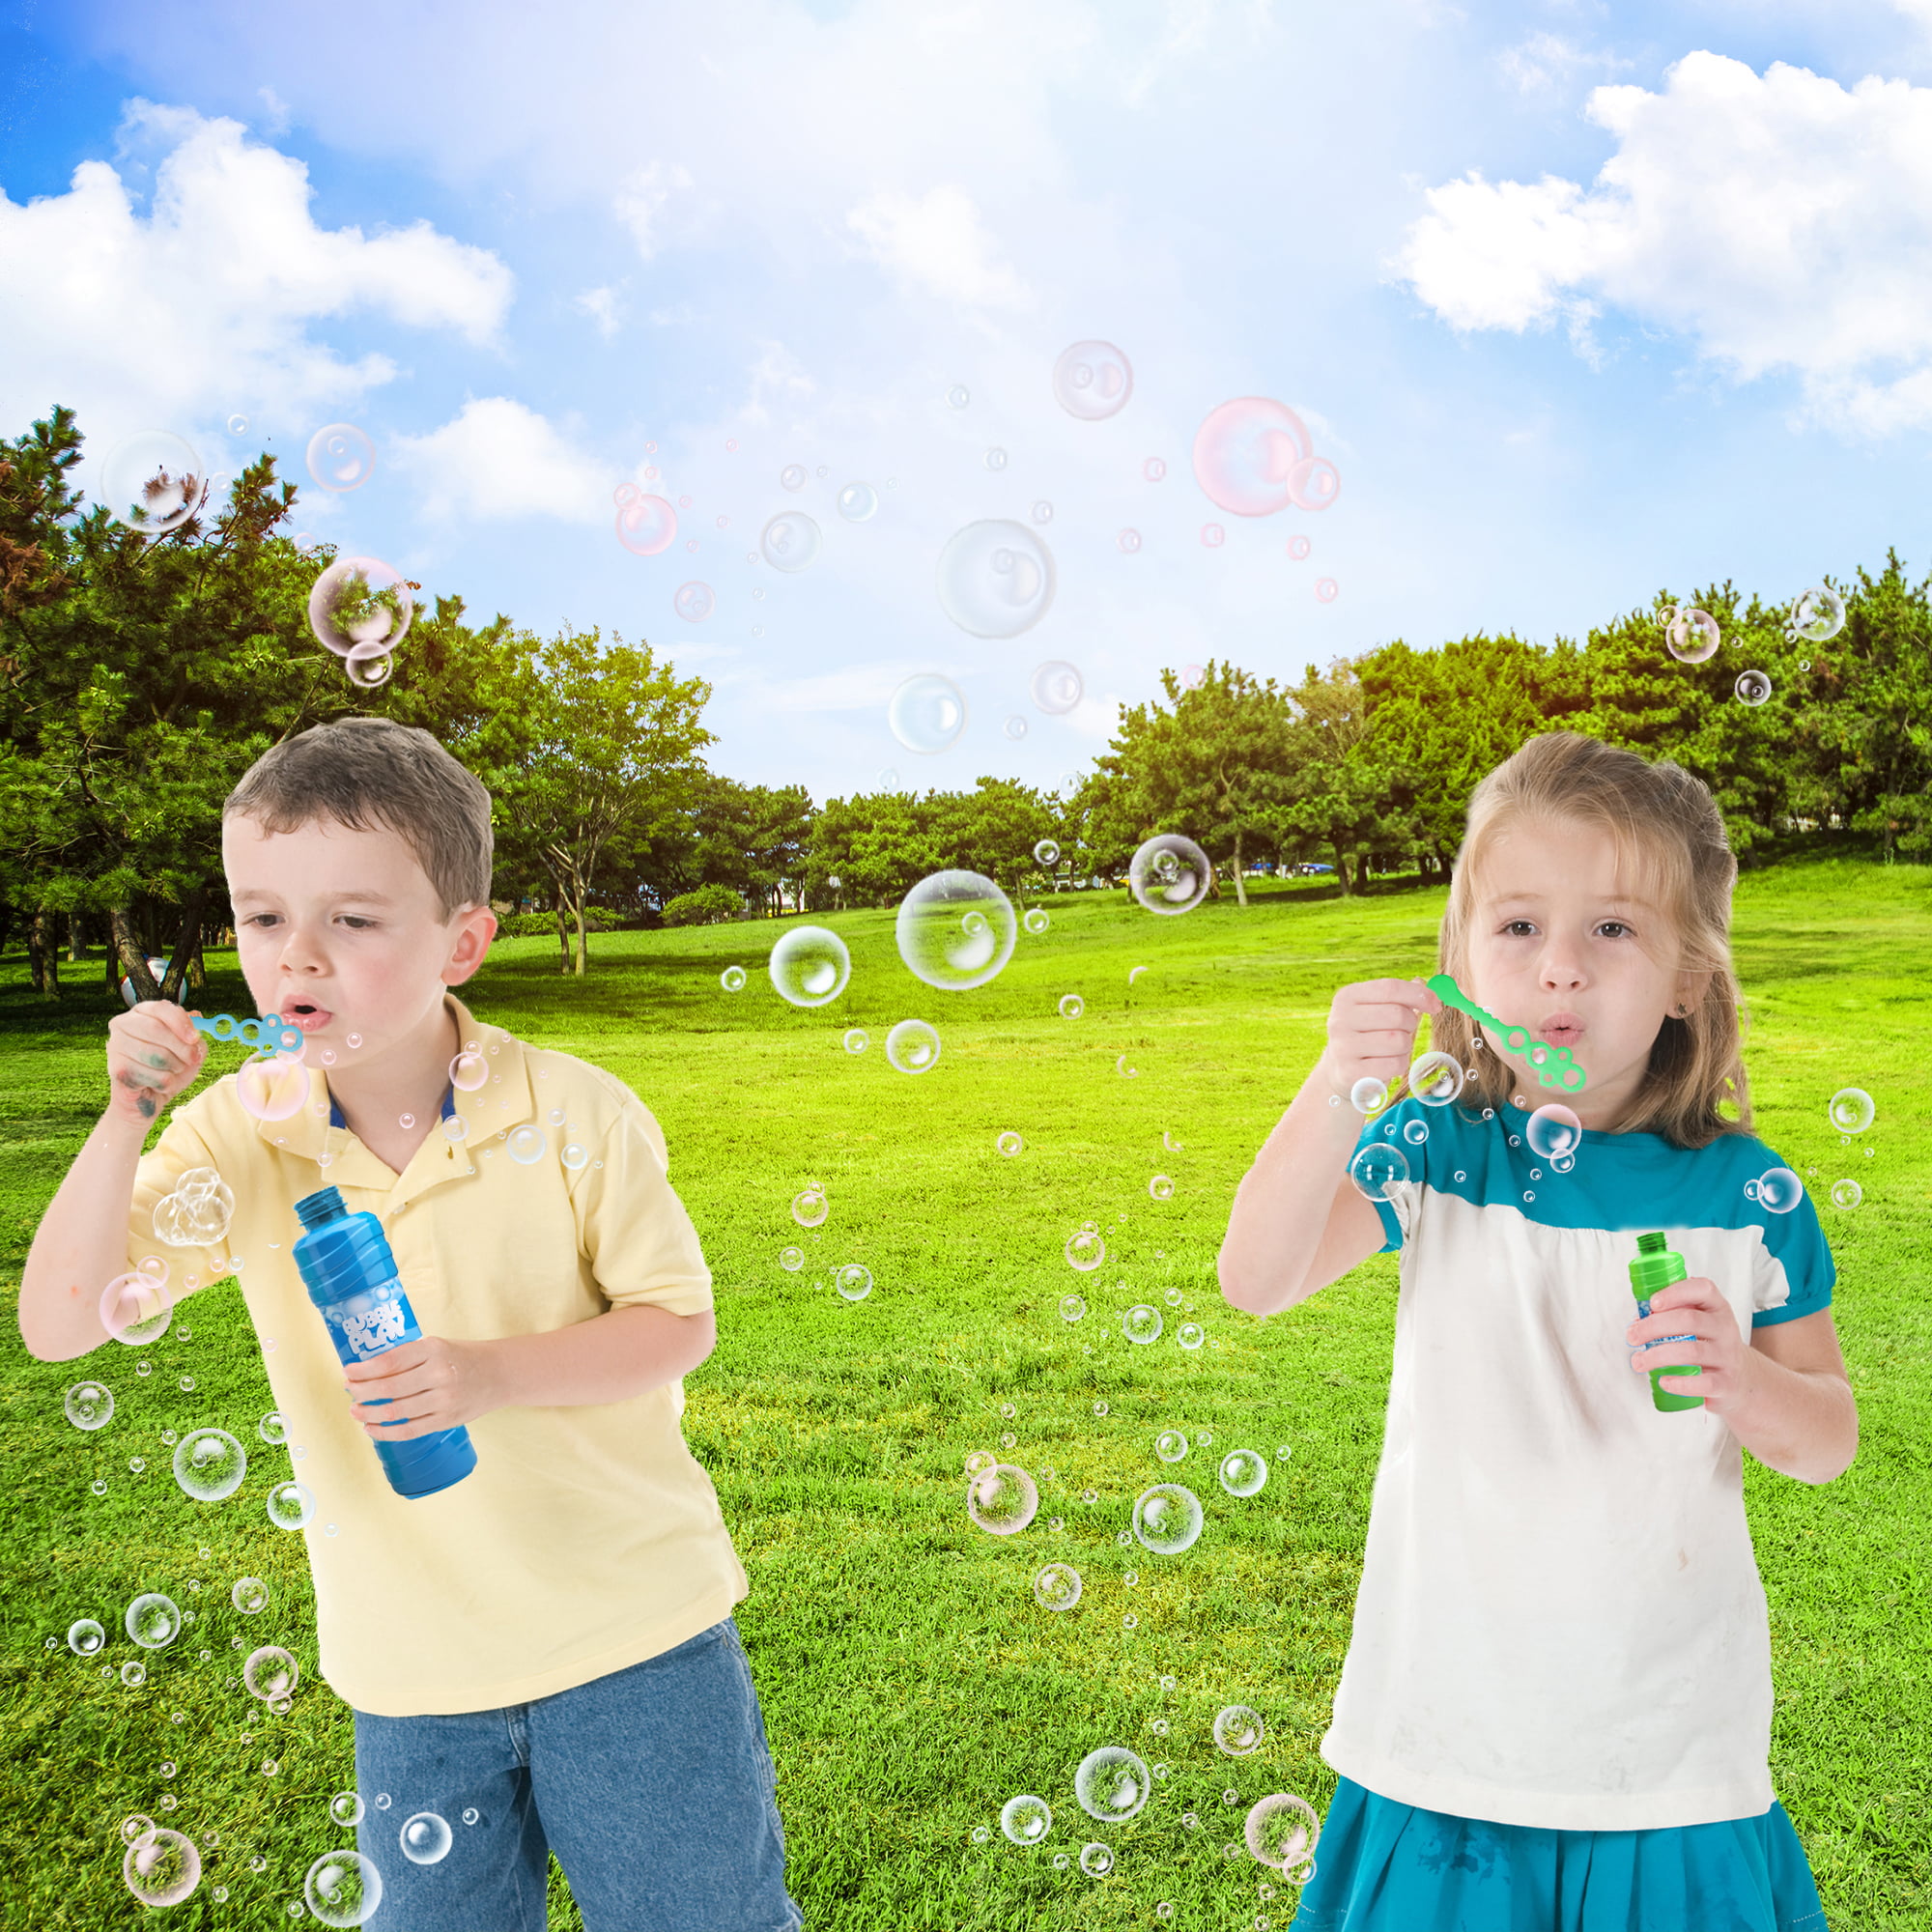 Bubble Solution Refills for Making Giant and Small Bubbles NO Mix Needed 3 Portable Easy-Grip Bottles of Bubble Solution Necessories for Bubble Guns Wands Blowers Bubble Machines 